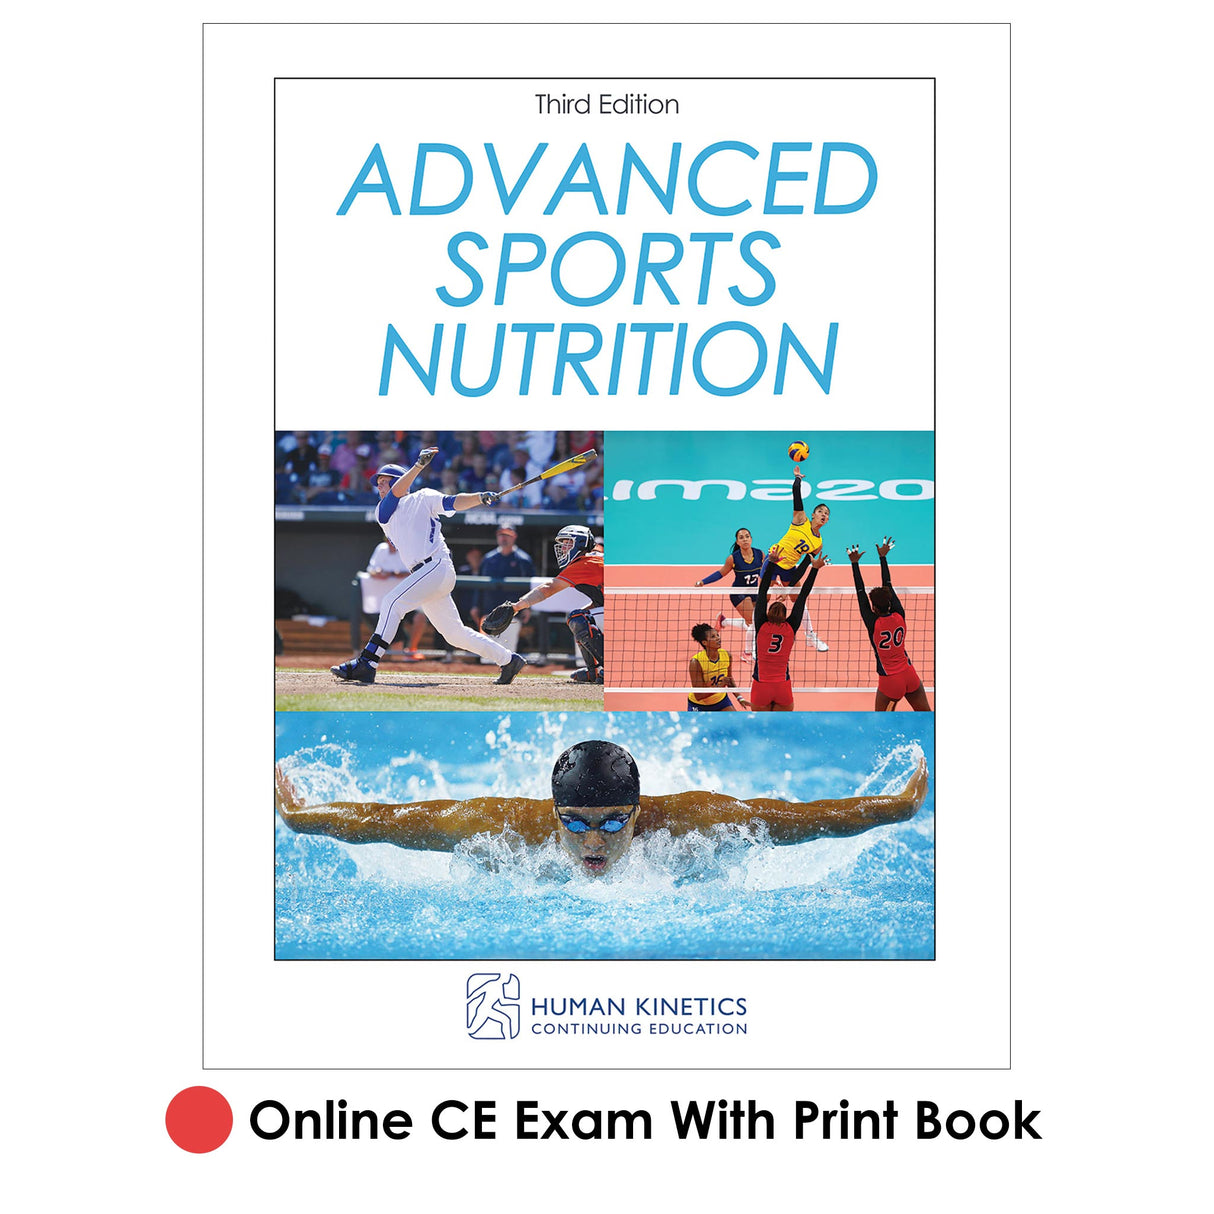 Advanced Sports Nutrition 3rd Edition Online CE Exam With Print Book